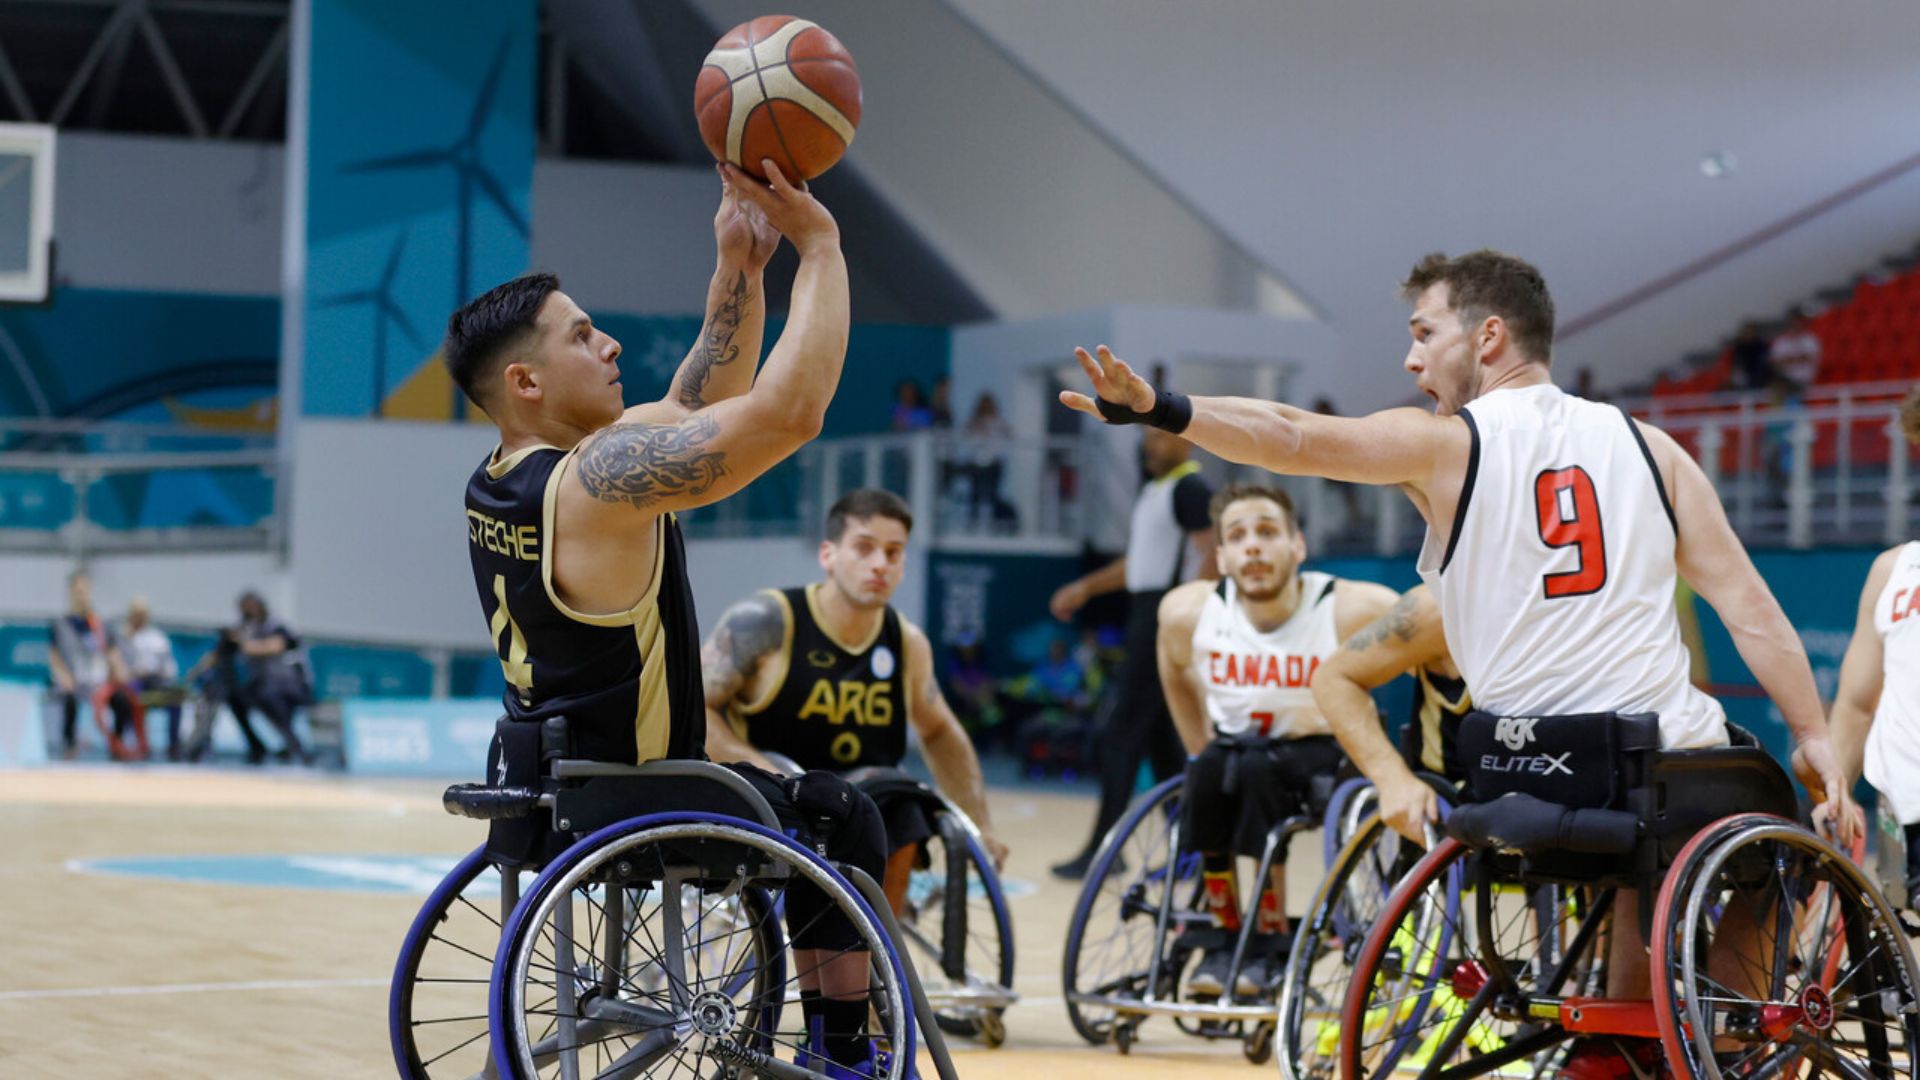 Canada Wins Thrilling Bronze Medal Match in Basketball